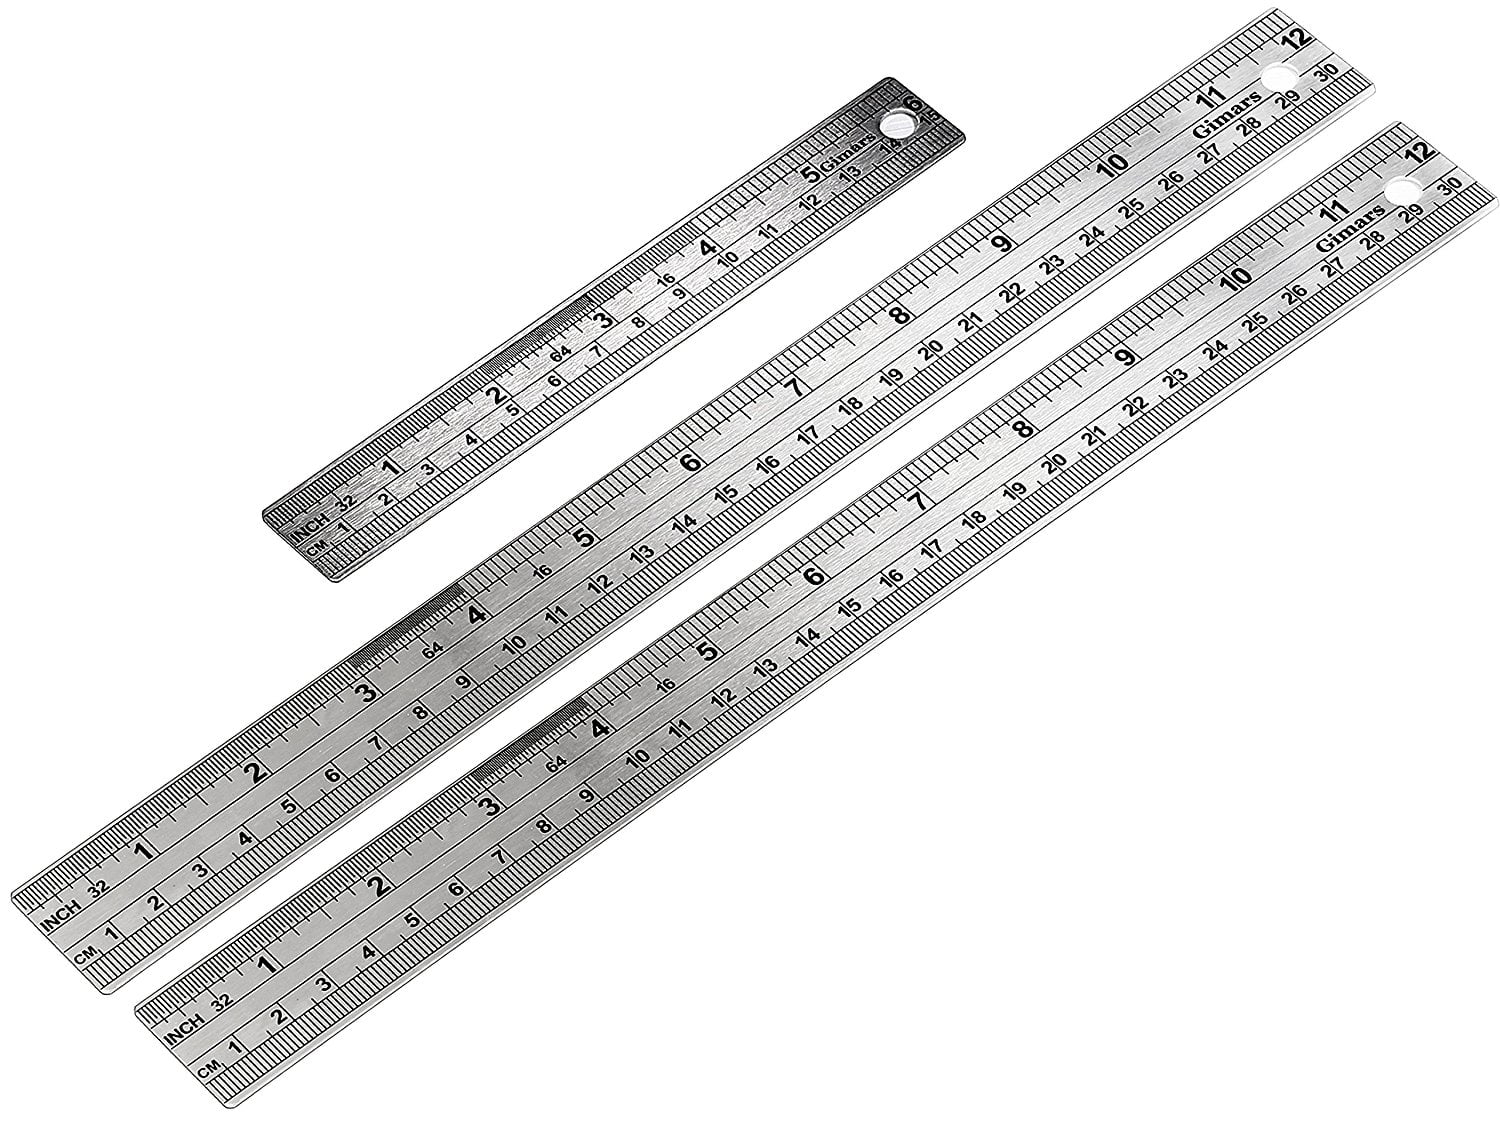 300mm Scale Ruler Set Small Large Measure Rule Metal Stainless A1T8 Steel J9U0 